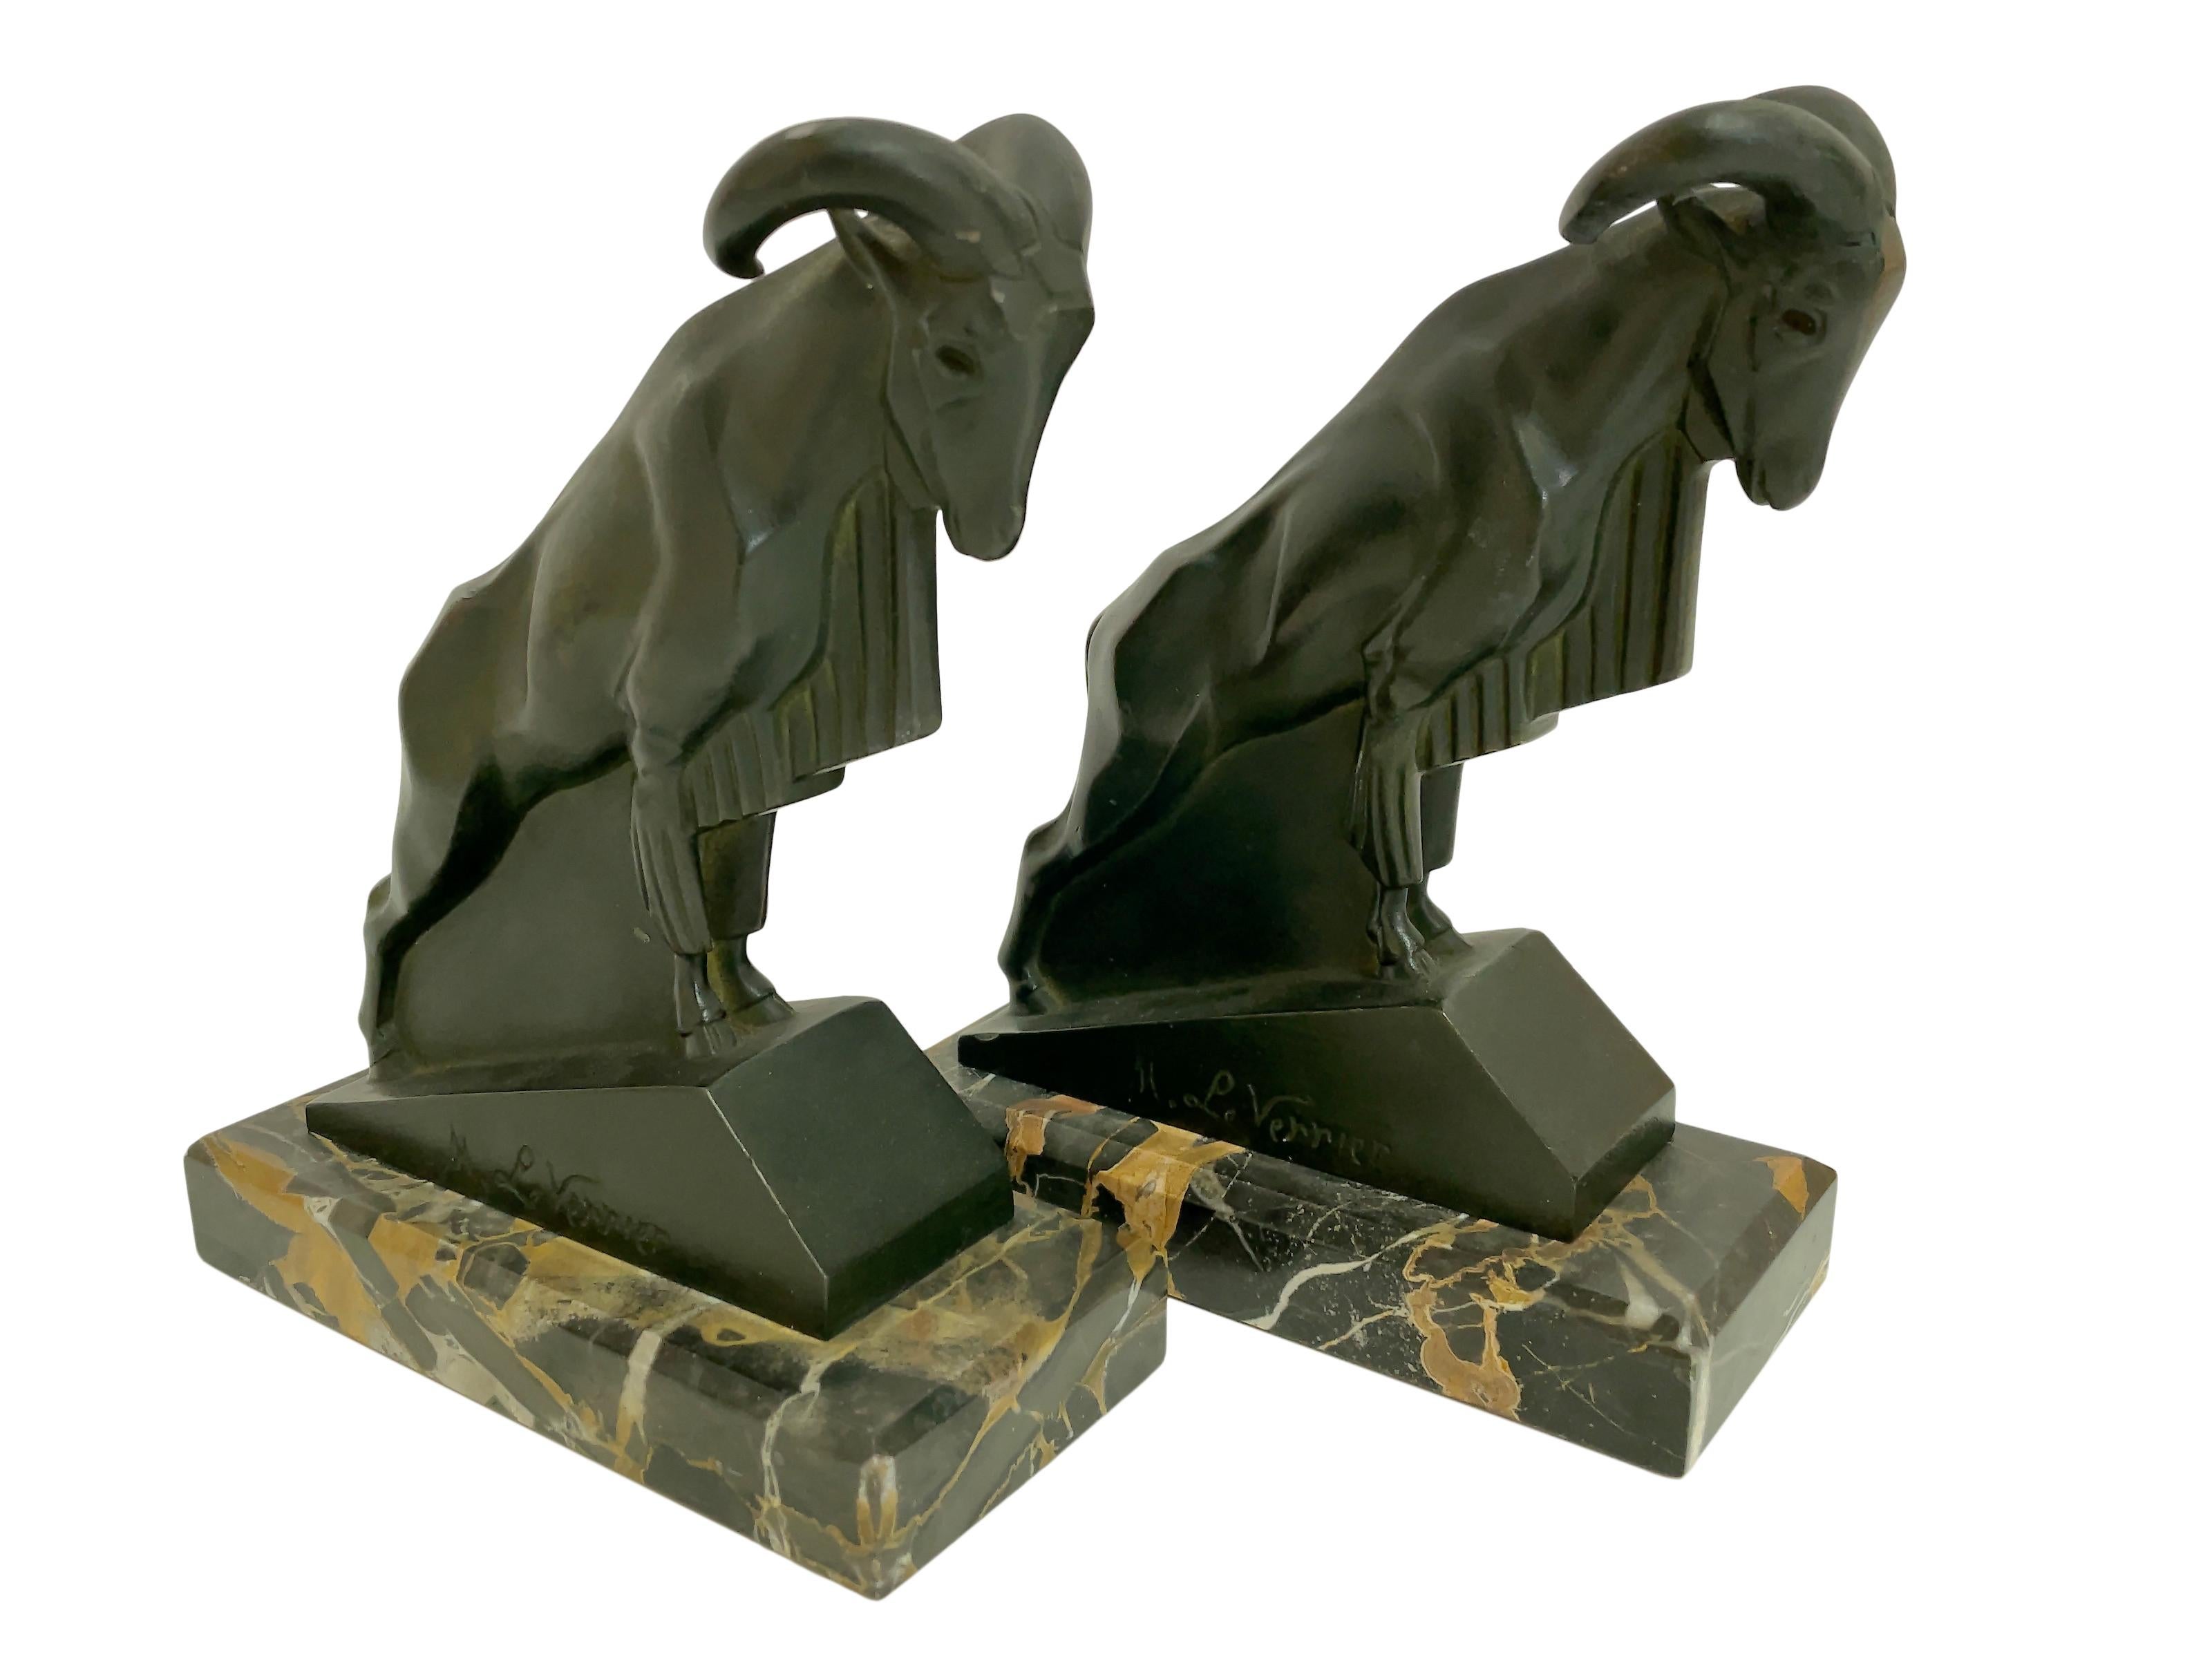 “Mouflon” French serre-livres
Original “Max Le Verrier” (1891-1973), signed
Original Art Deco, France,1930s 

Vintage bookend sculptures of two Aries
Bookends made in spelter (French: “Régule”)
Base / socle: Portor marble (well known in the